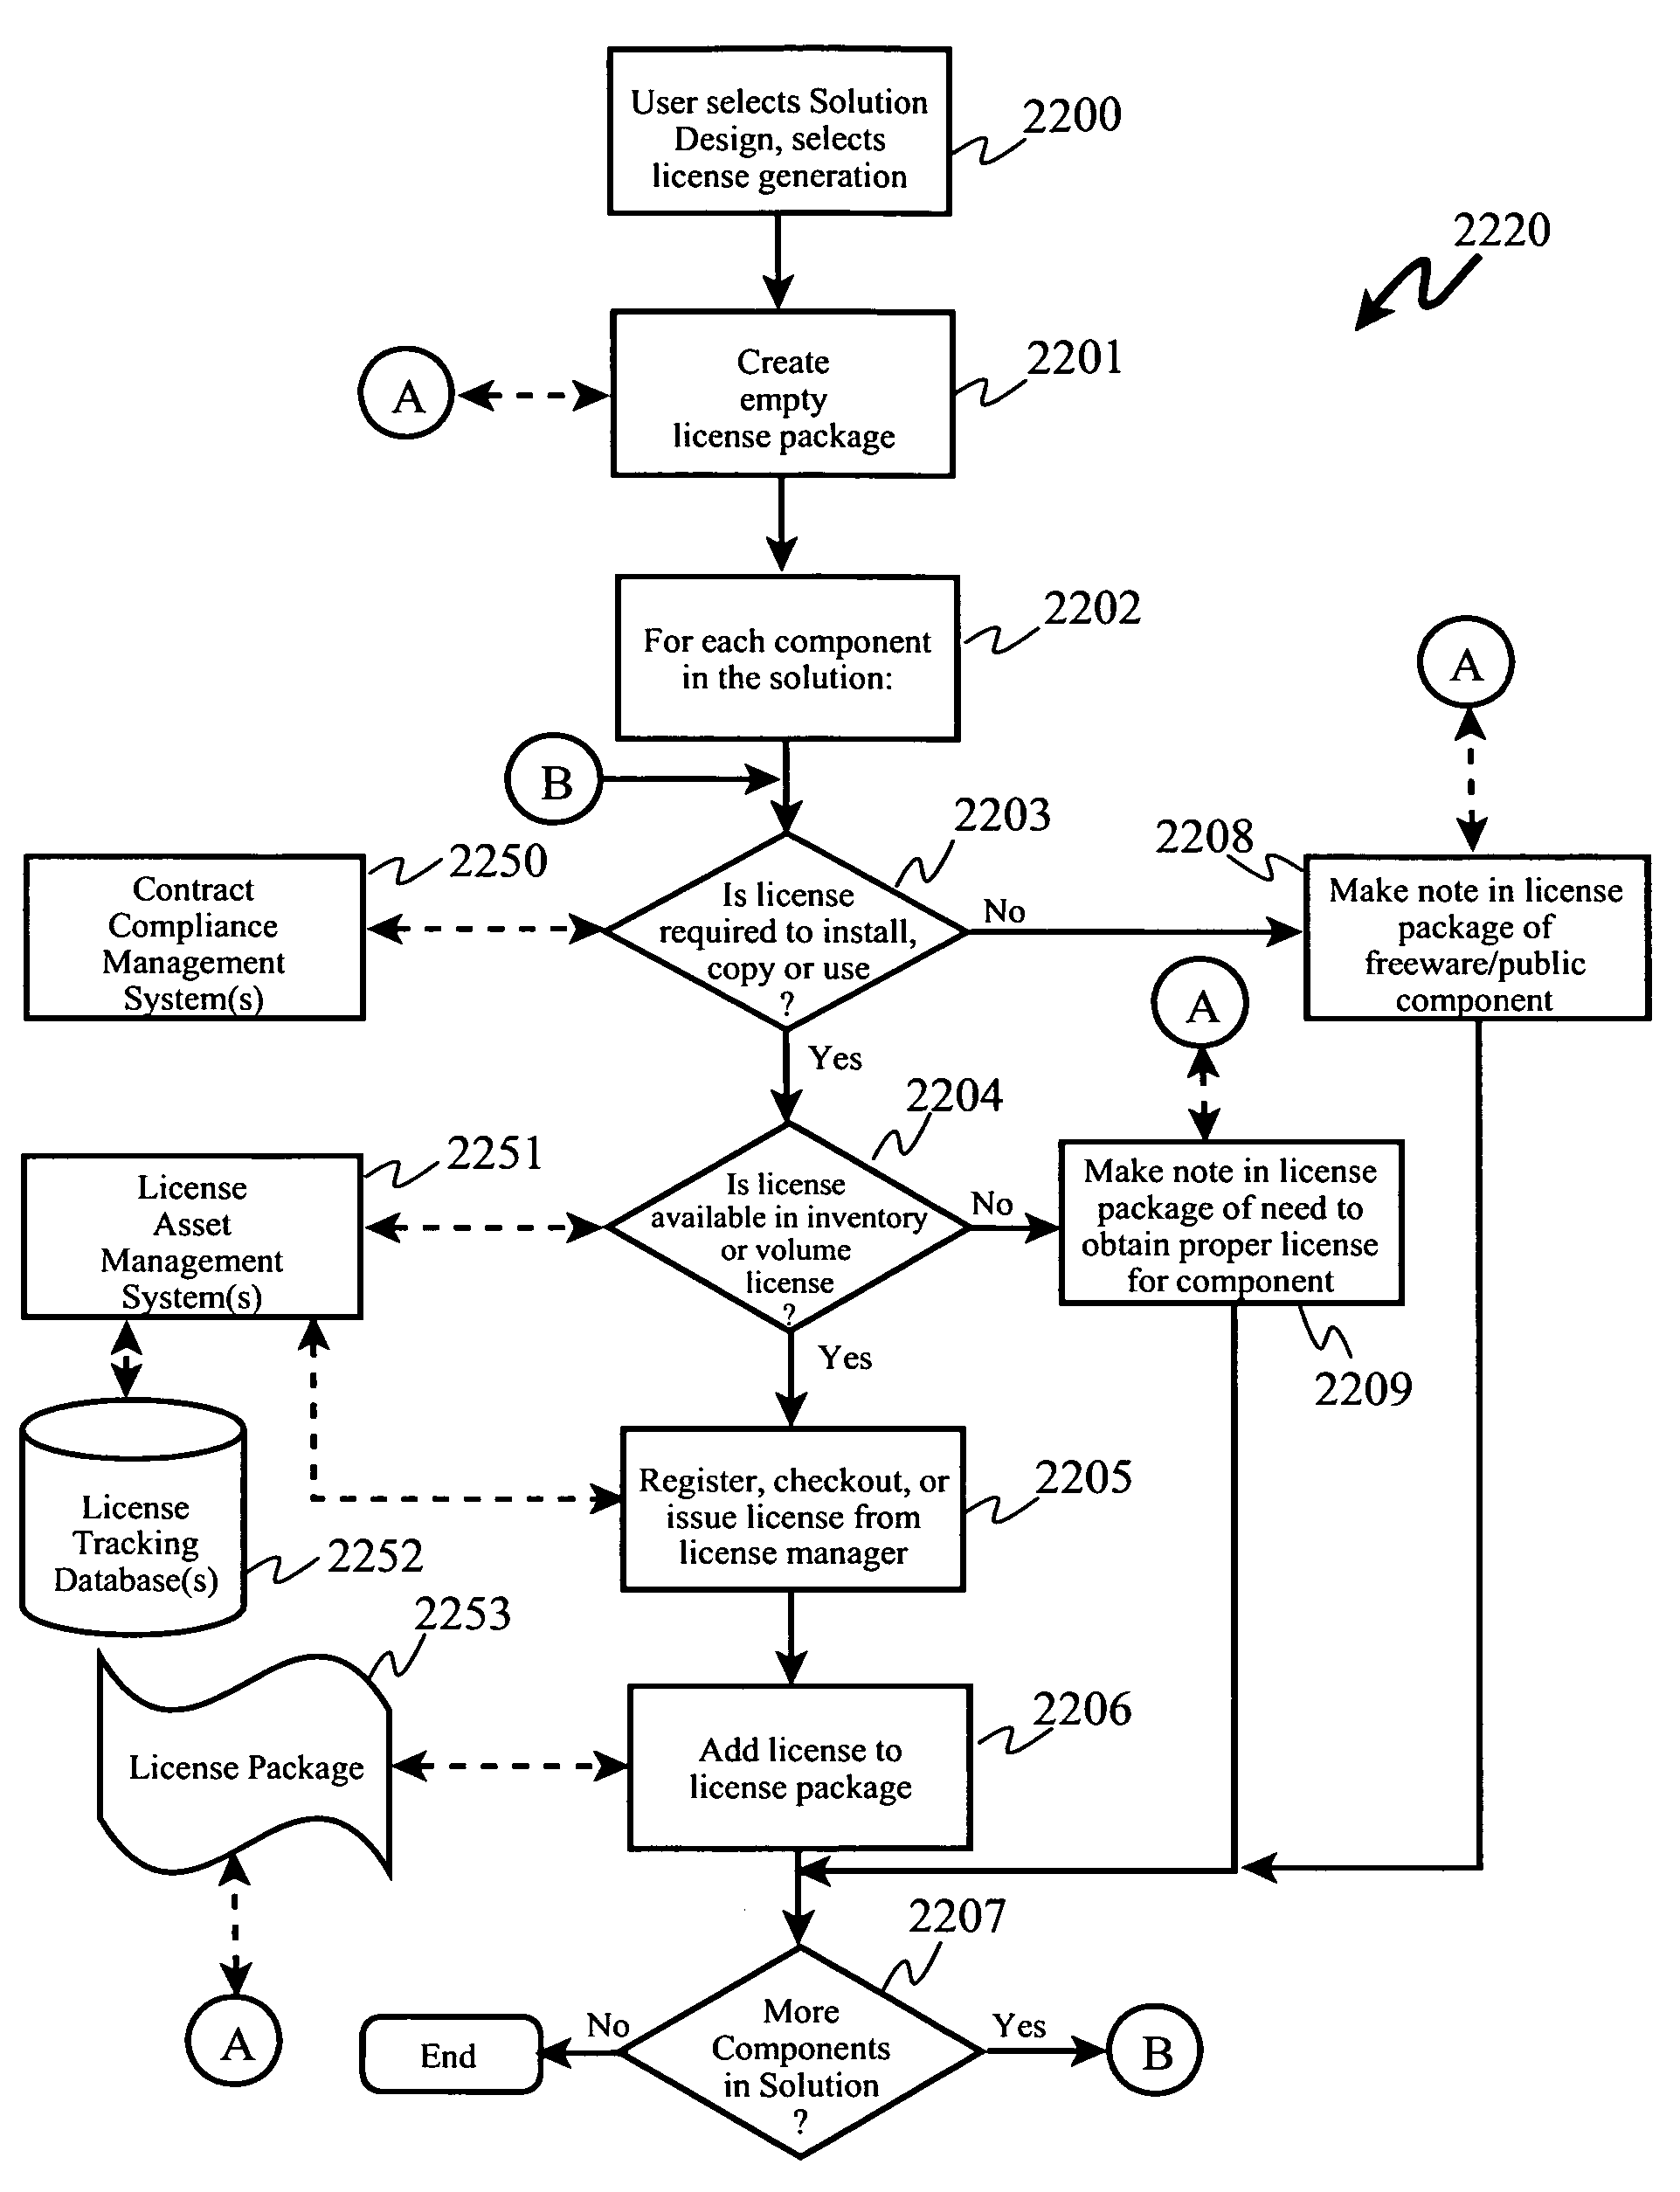 Automatic generation of license package for solution components